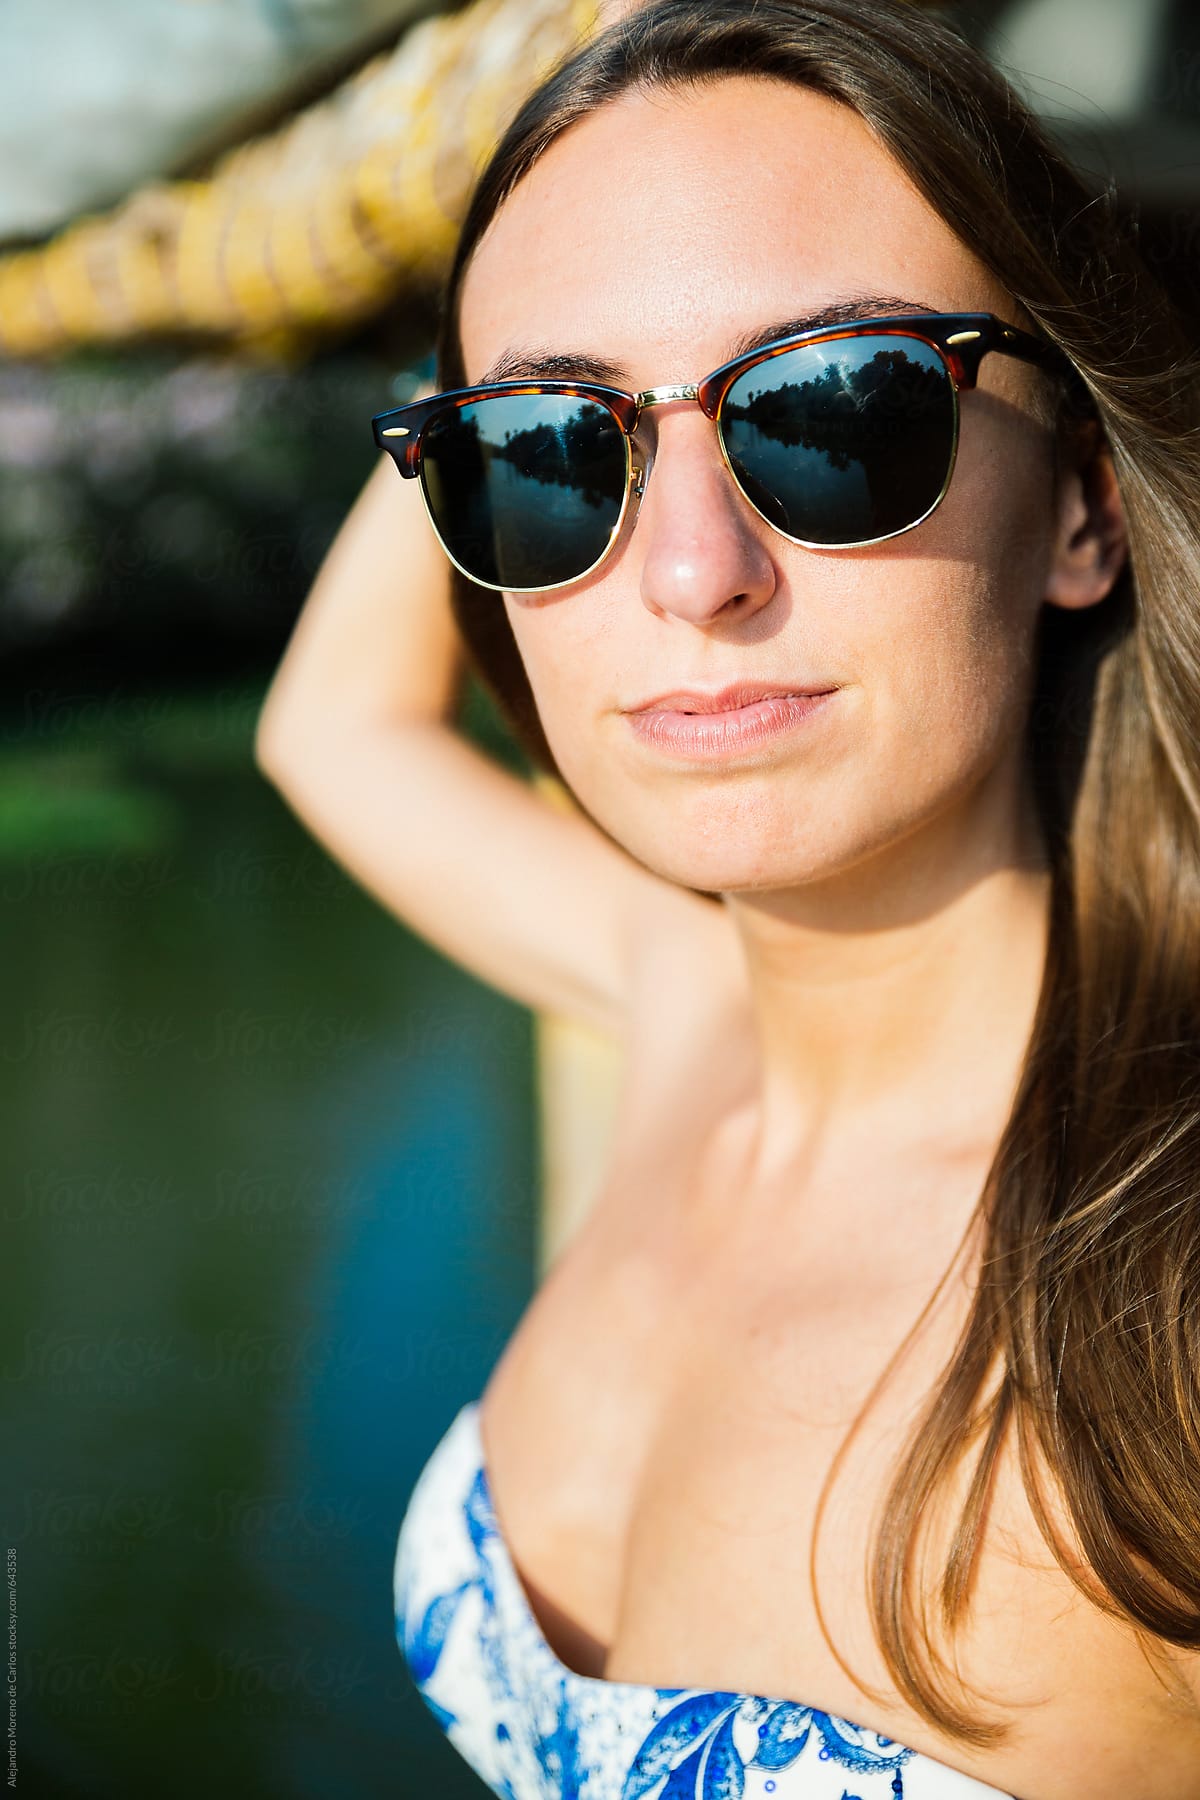 Young woman close-up portrait wearing sunglasses and bikini in a boat